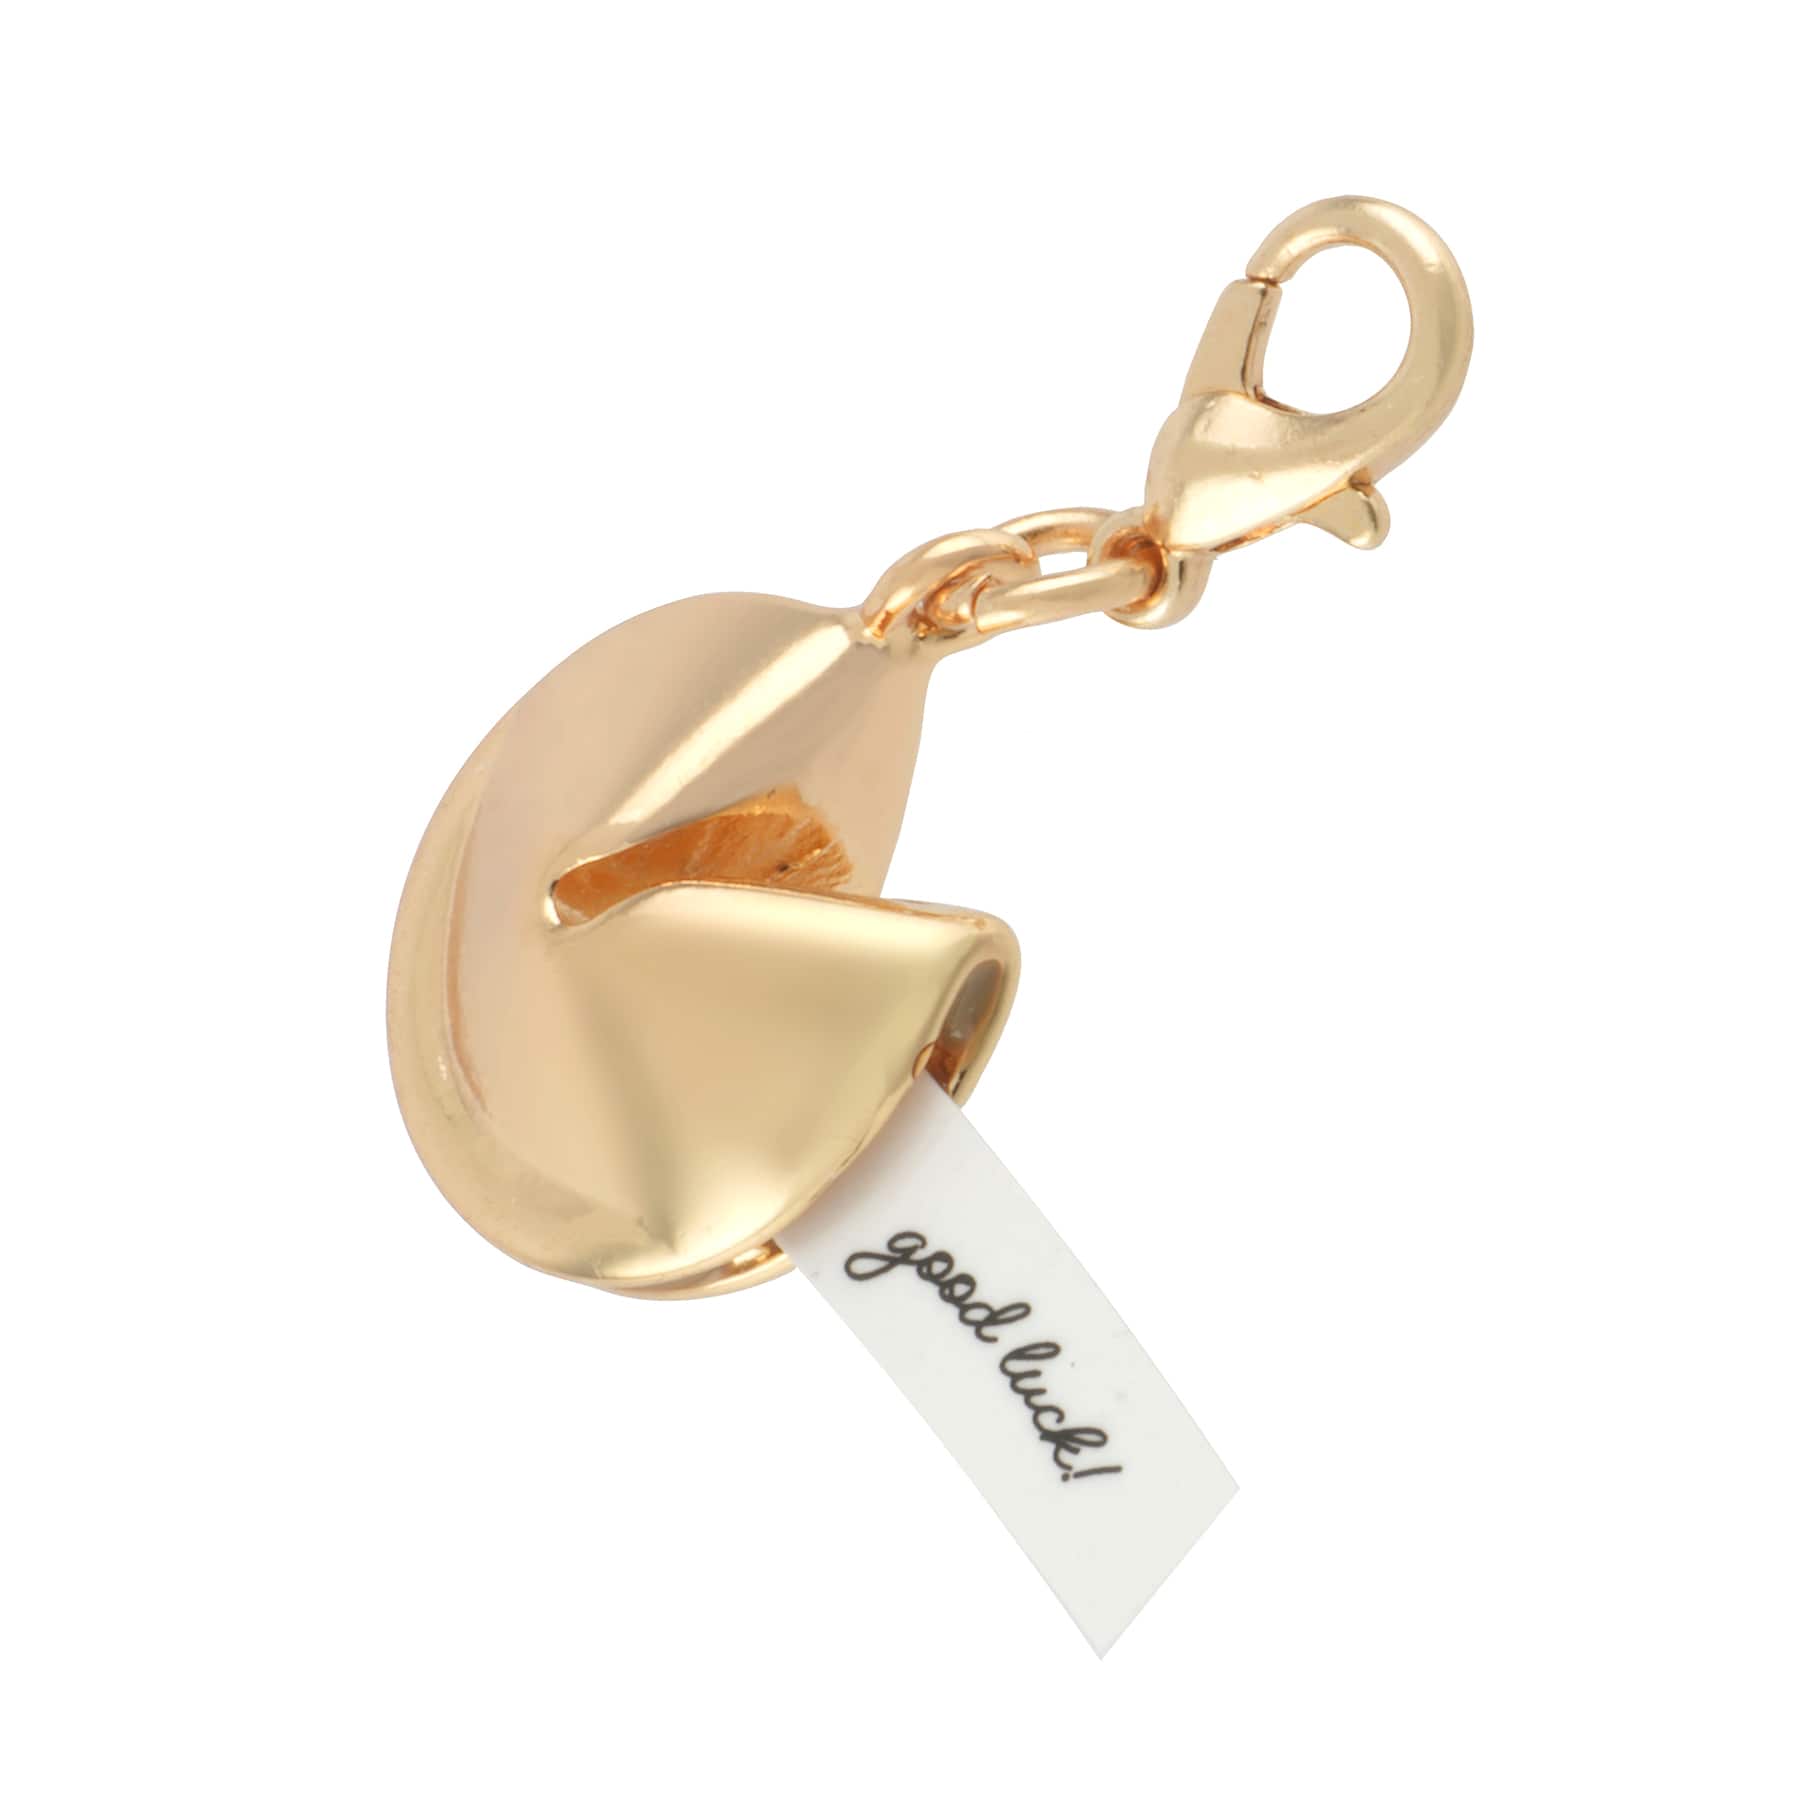 Fortune cookie keychain. I need it. : r/Louisvuitton